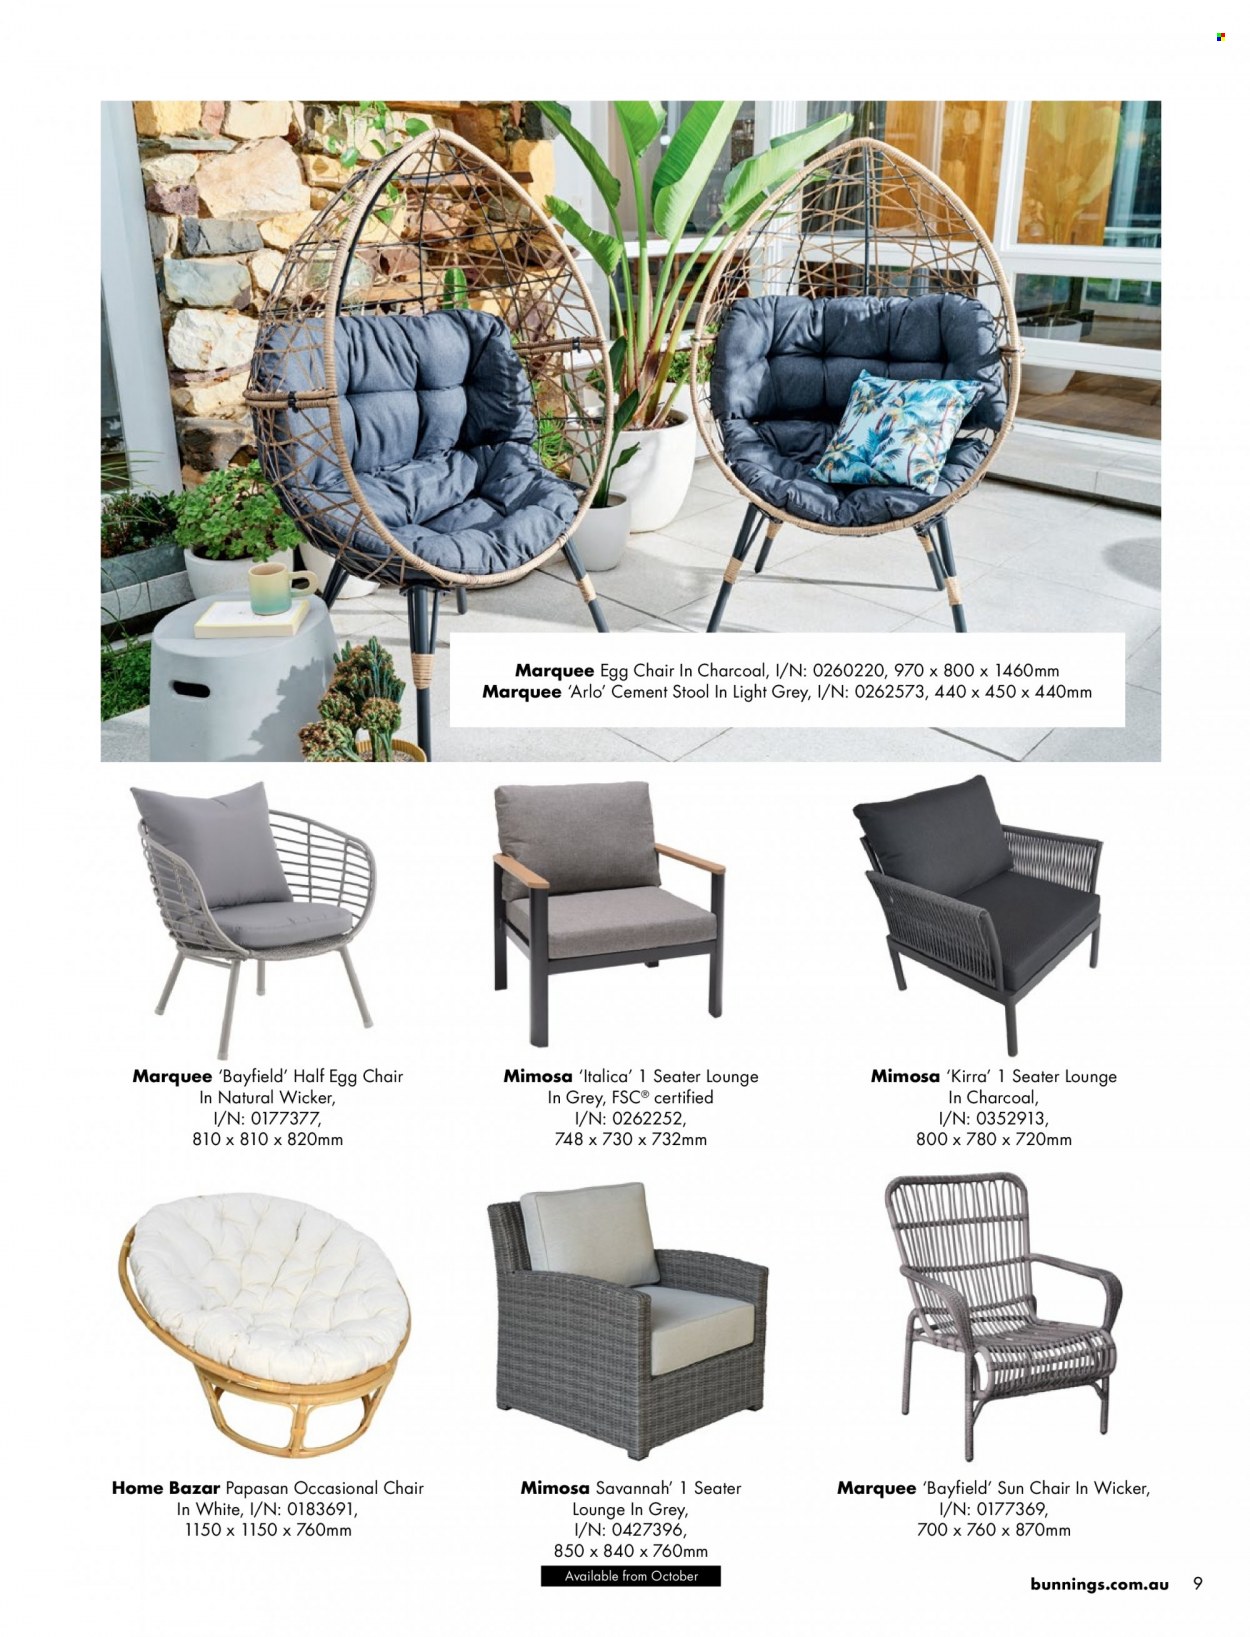 thumbnail - Bunnings Warehouse Catalogue - Sales products - stool, chair, lounge. Page 9.